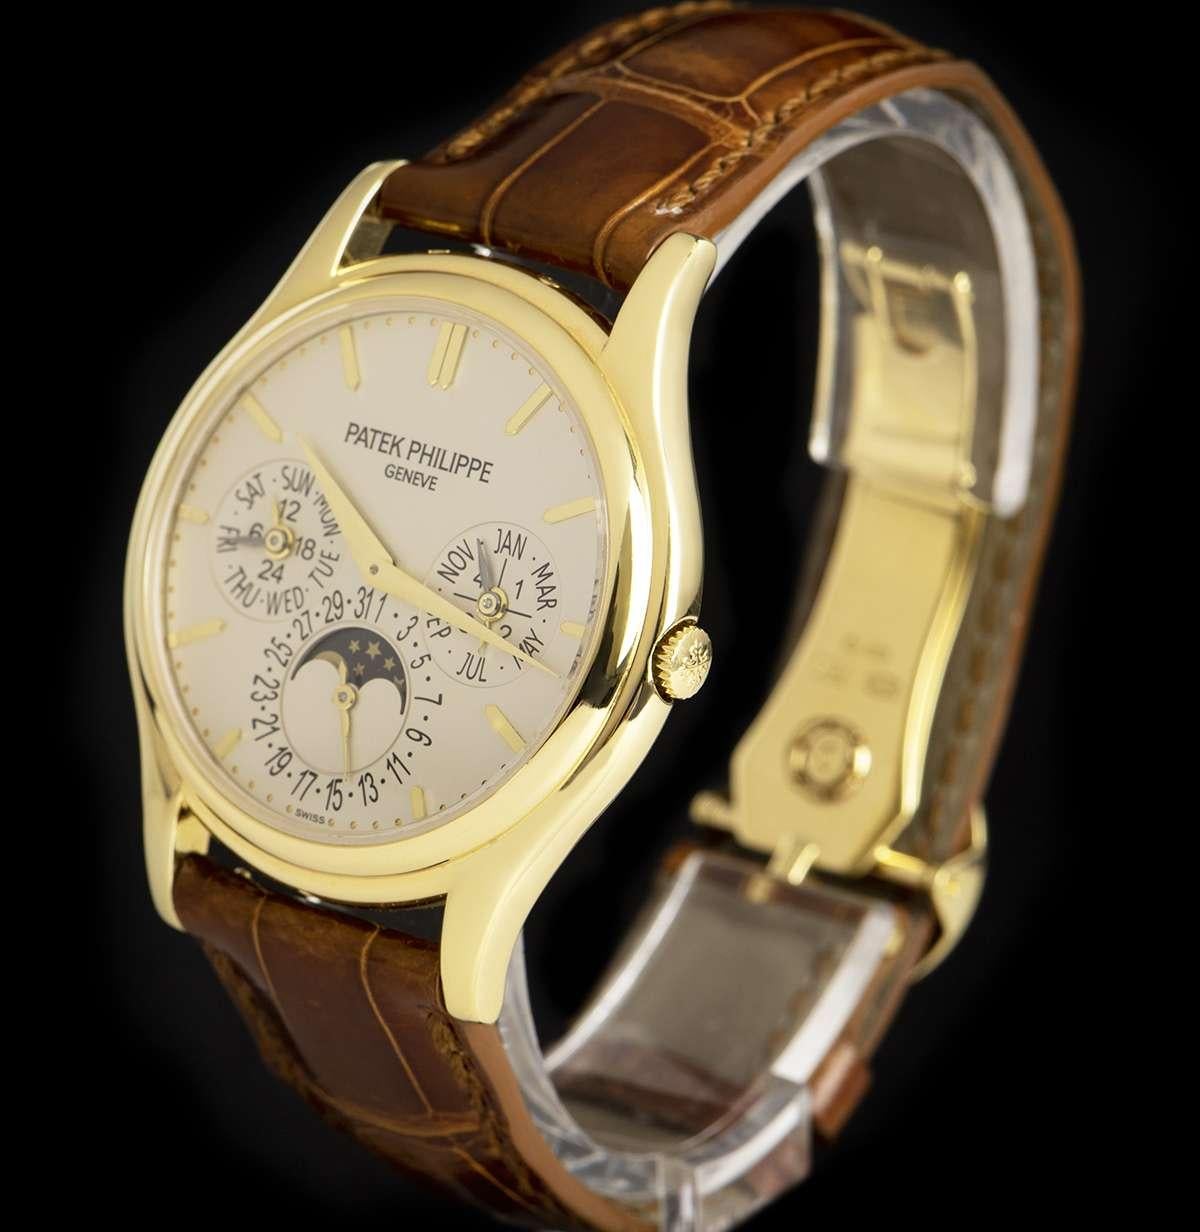 An 18k Yellow Gold Perpetual Calendar Gents Wristwatch, silver dial with applied hour markers, month and leap year sub-dial at 3 0'clock, moonphase display and date at 6 0'clock, week day and 24 hour sub-dial at 9 0'clock, a fixed 18k yellow gold